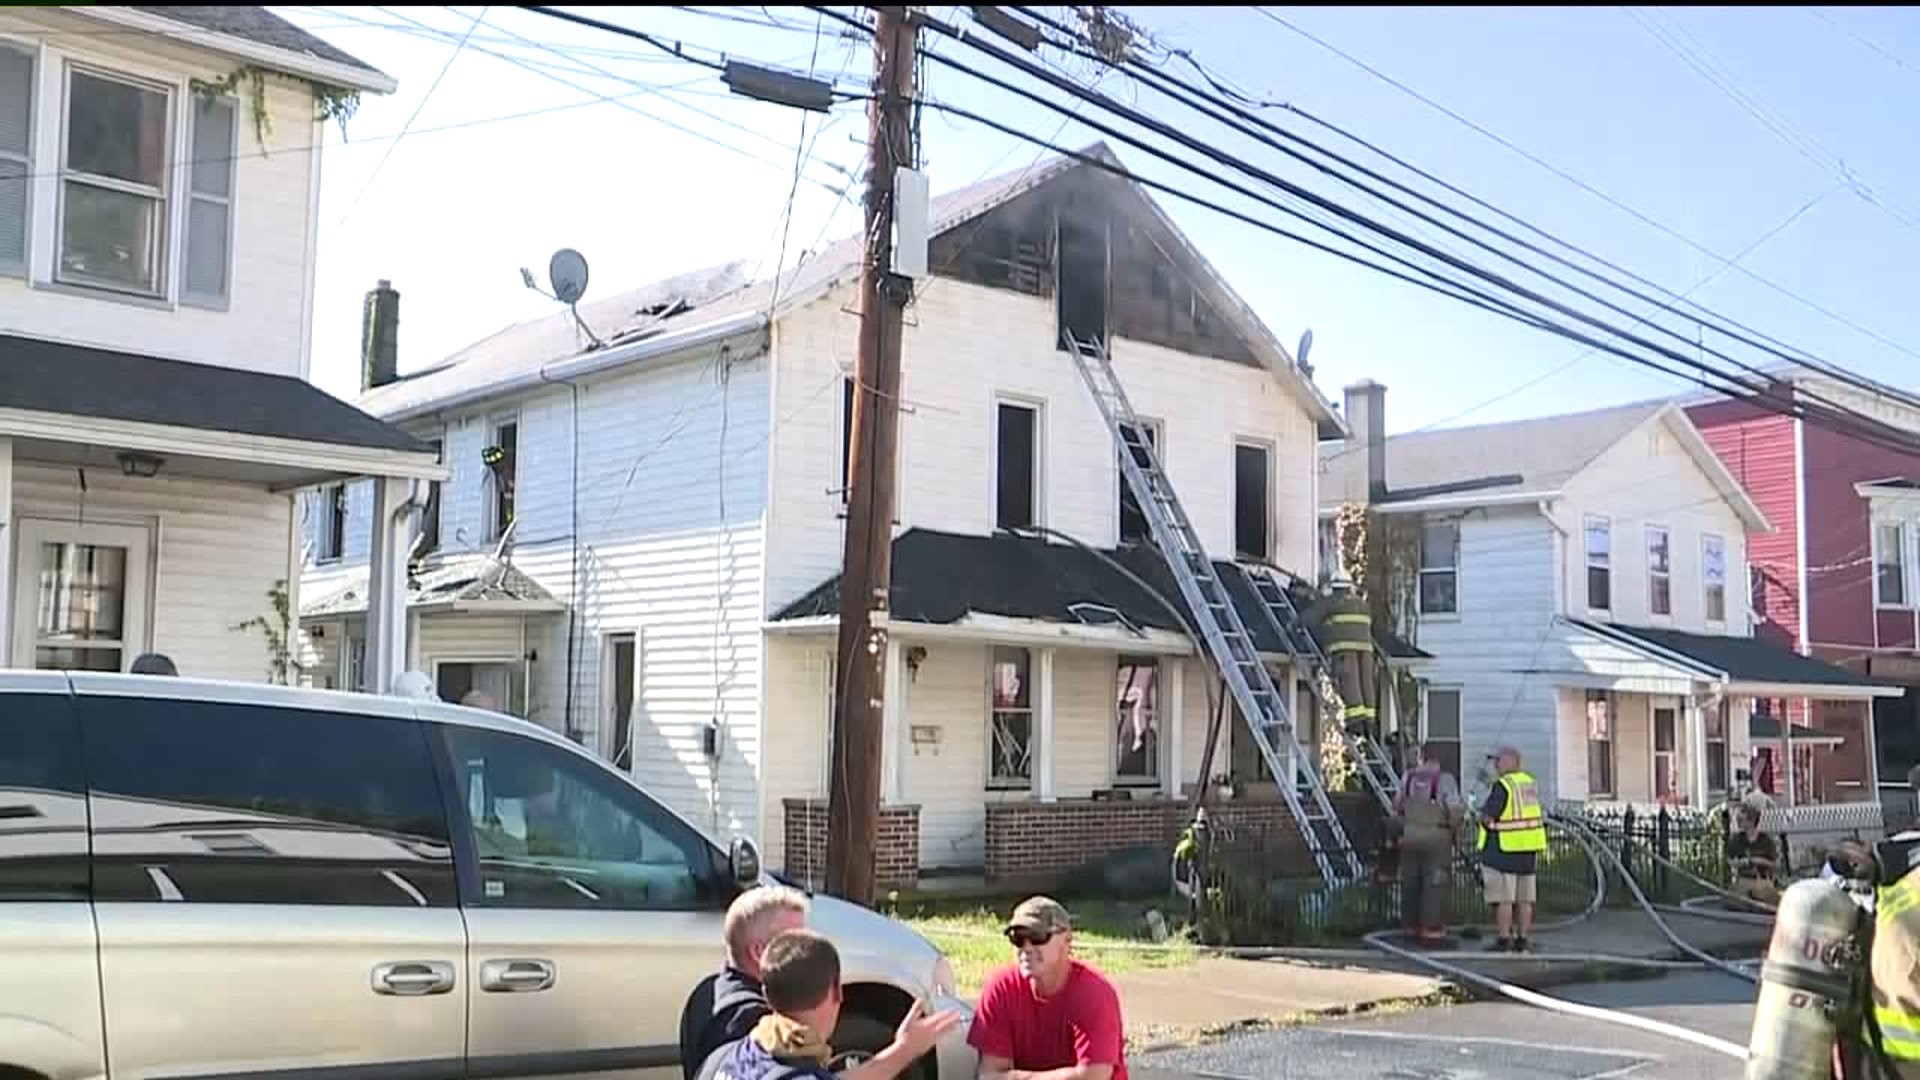 Firefighter Hospitalized Battling Flames in Plymouth